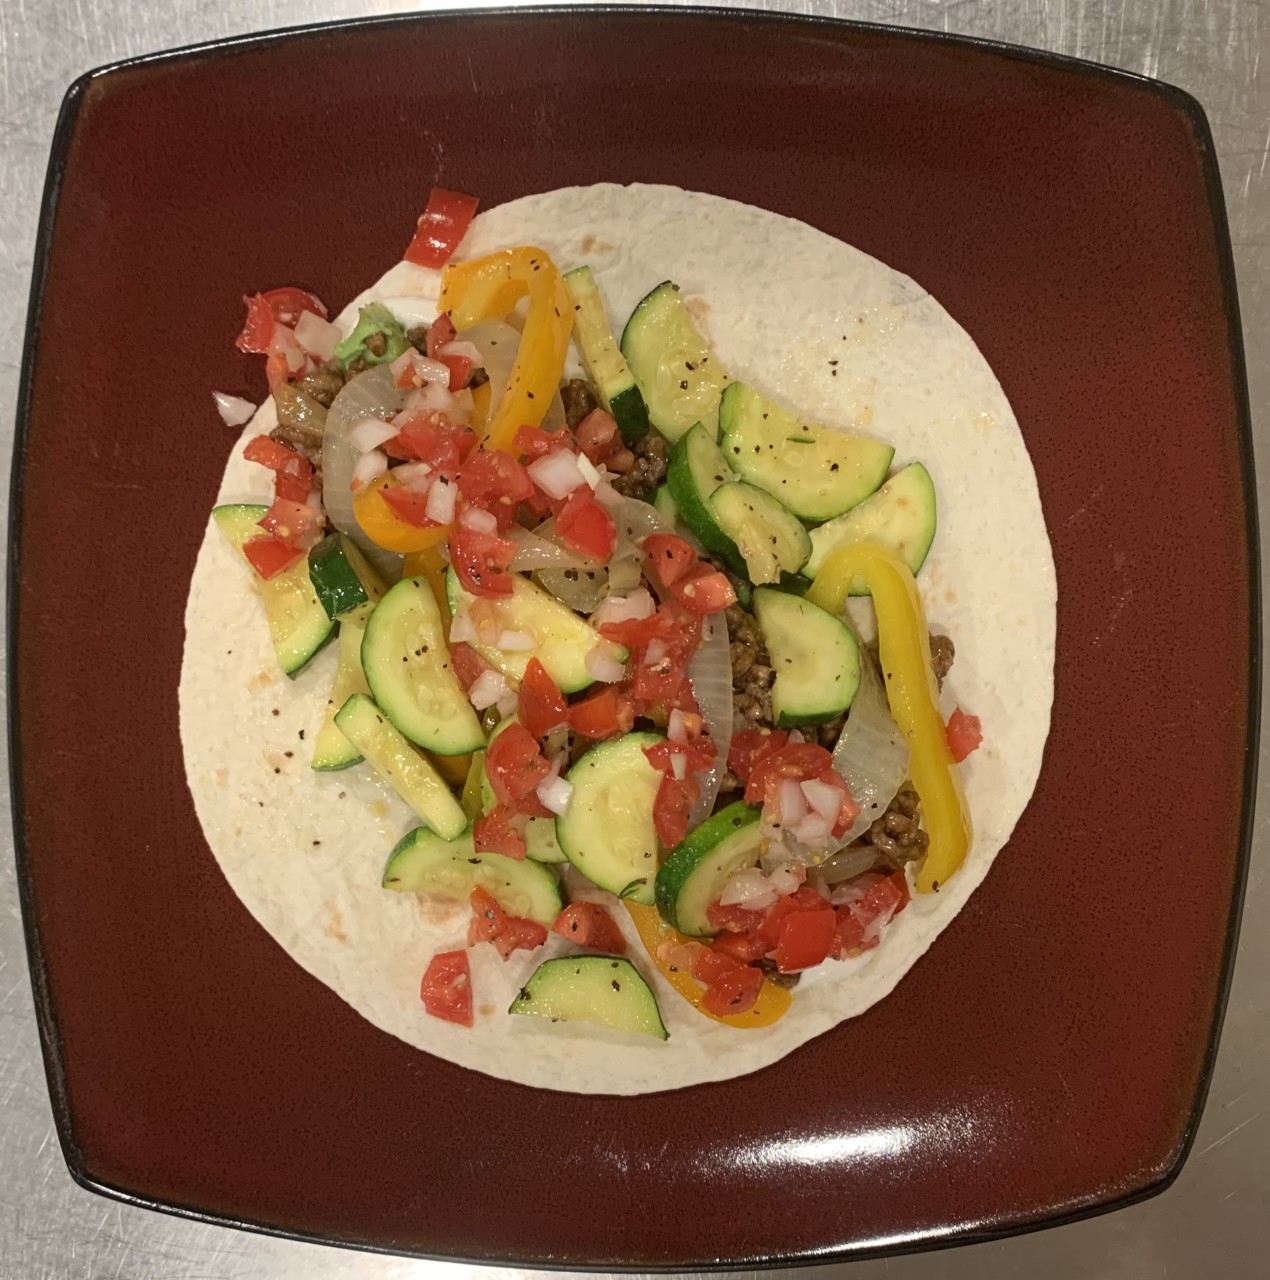 <a class="bx-tag" rel="tag" href="https://streetloc.com/view-channel-profile/whatsfordinner"><s>#</s><b>whatsfordinner</b></a> Low Carb Tortilla Burrito, with Ground Beef and Sautéed Zucchini, Onion and Bell Pepper, topped with homemade Pico de Gallo (tomato, onion, serrano pepper)